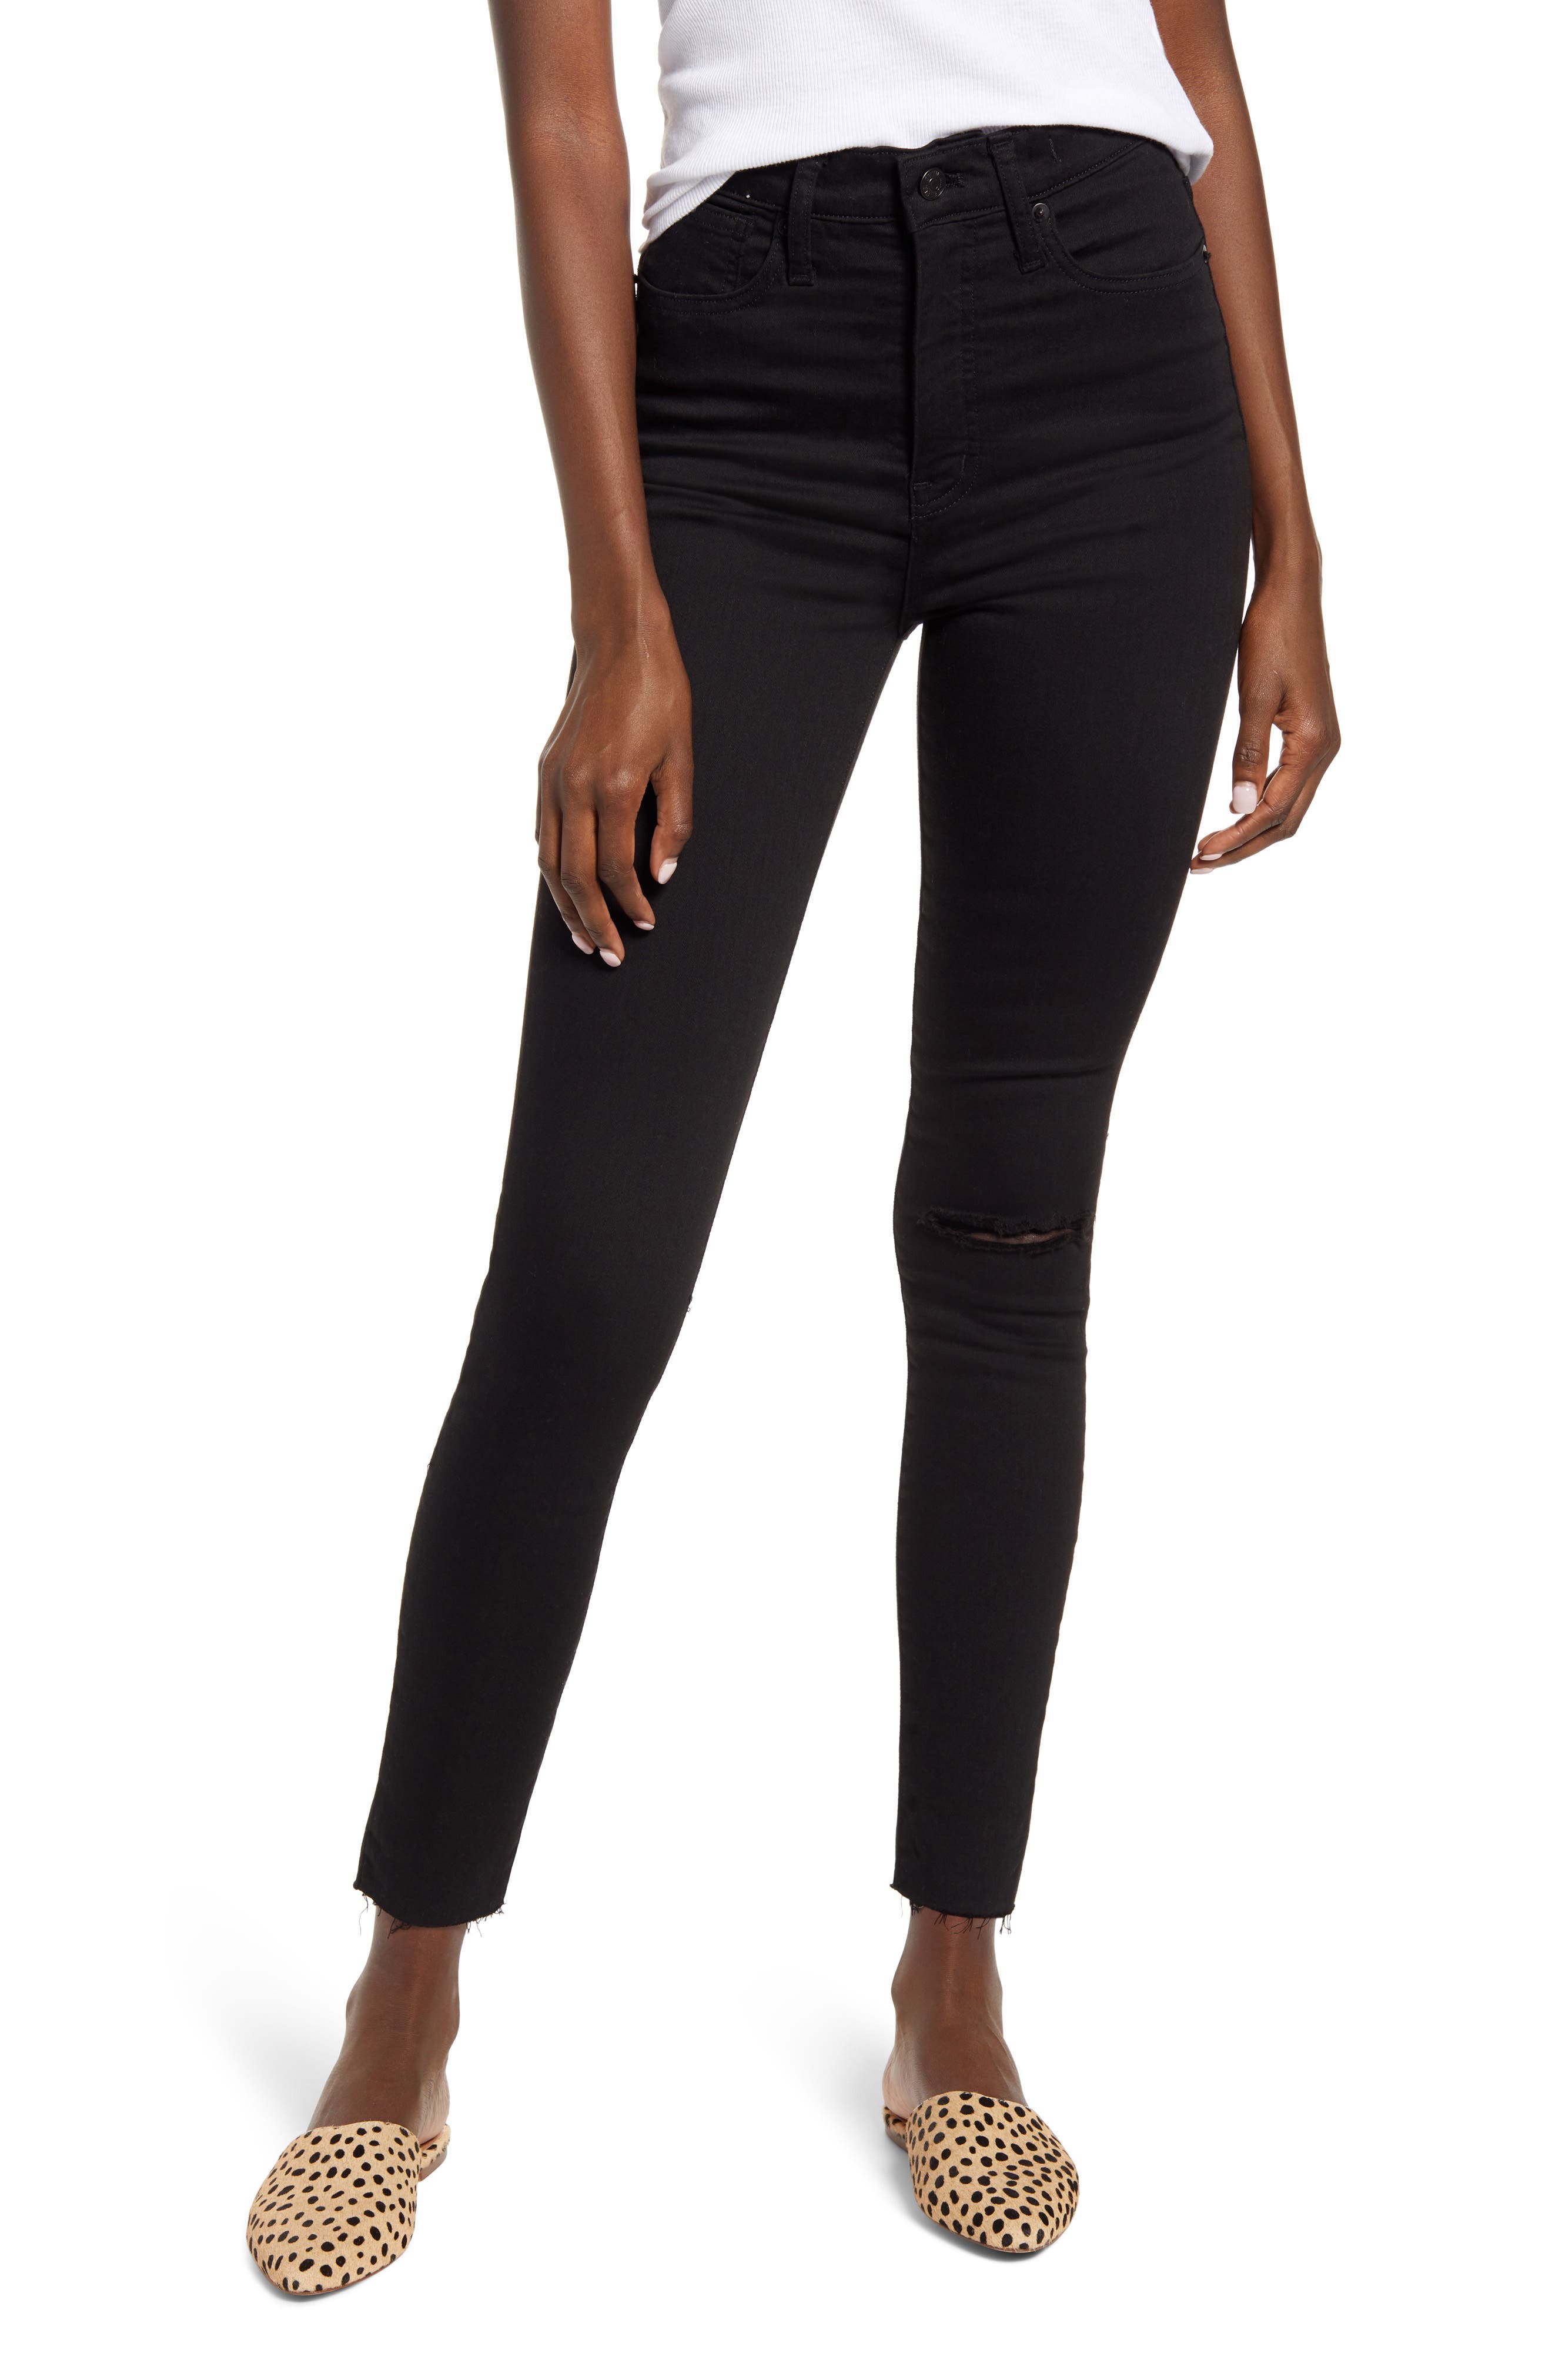 madewell 11 inch rise curvy jeans